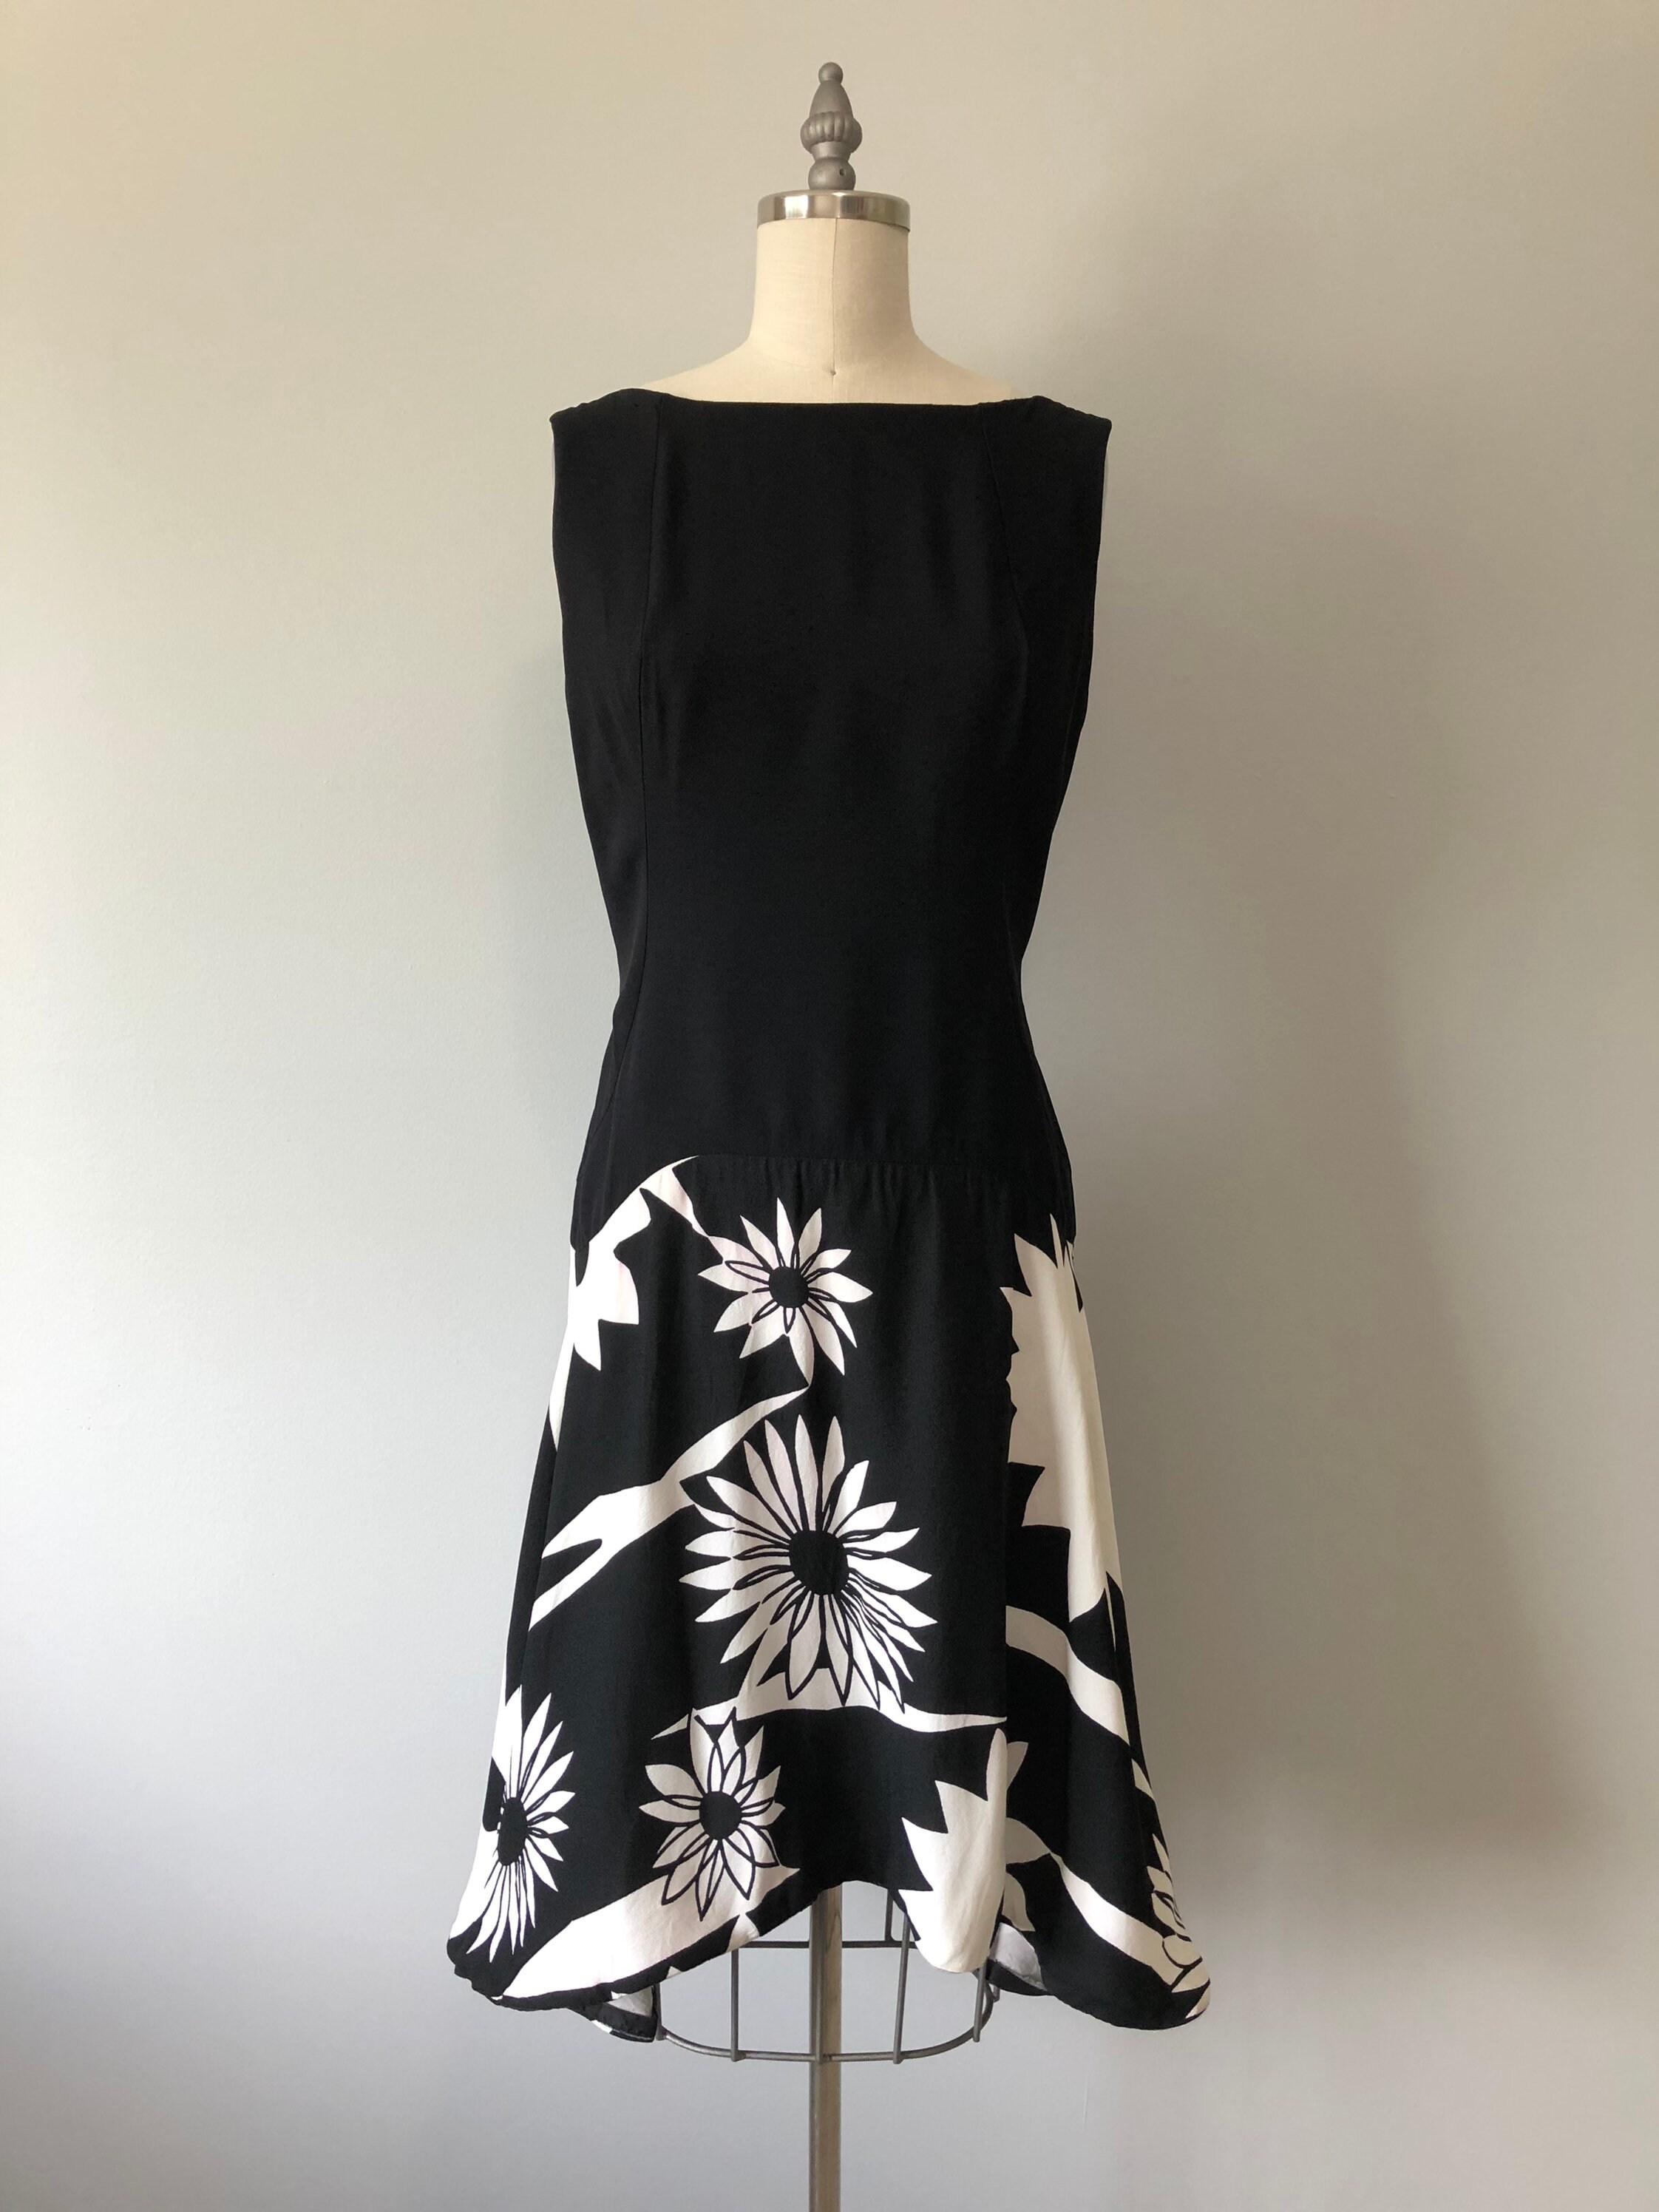 Black and White Dress / Floral Patterned Skirt / 60s Day Dress - Etsy ...